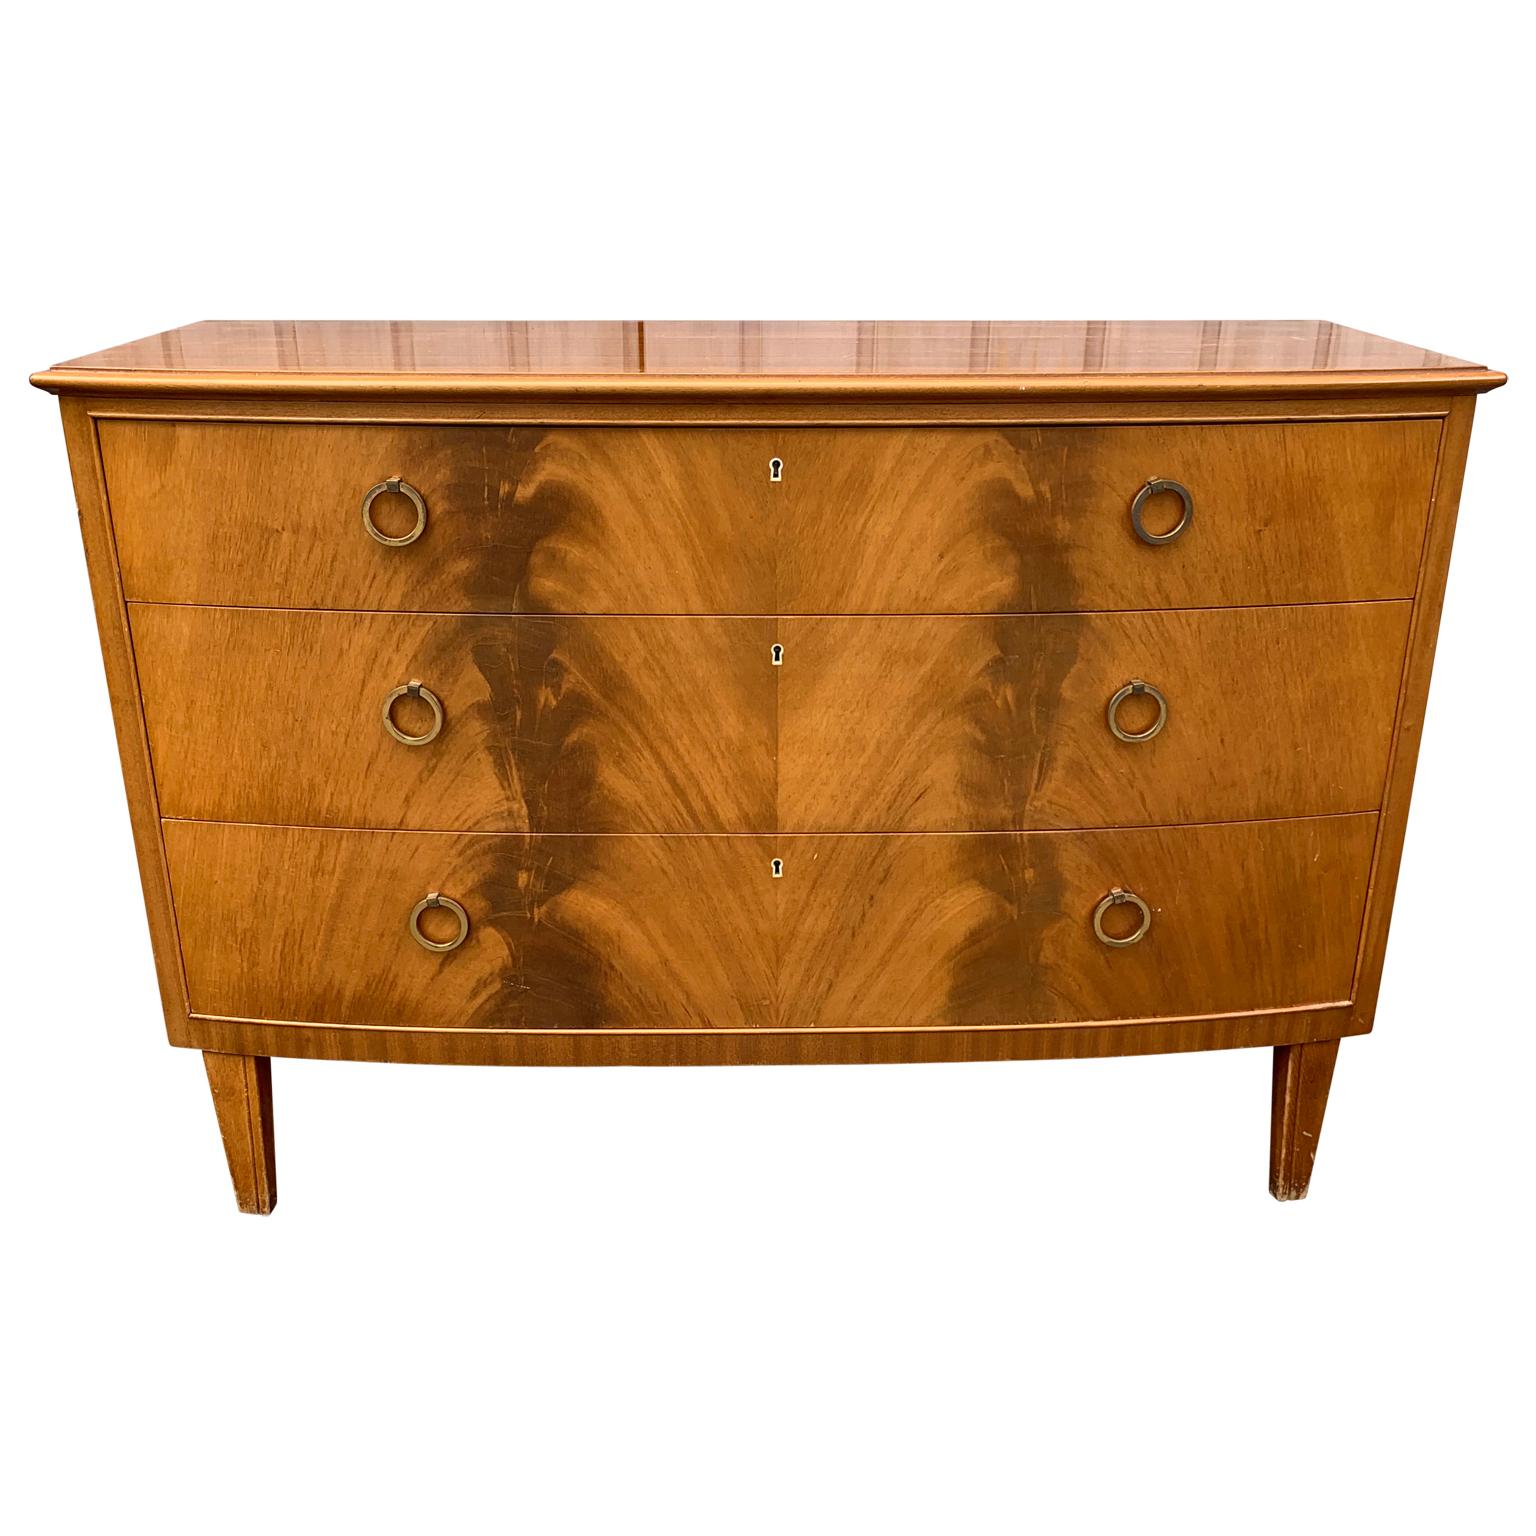 Mid-Century Modern Swedish Midcentury 3-Drawer Chest with Light Mahogany Veneer and Curved Front